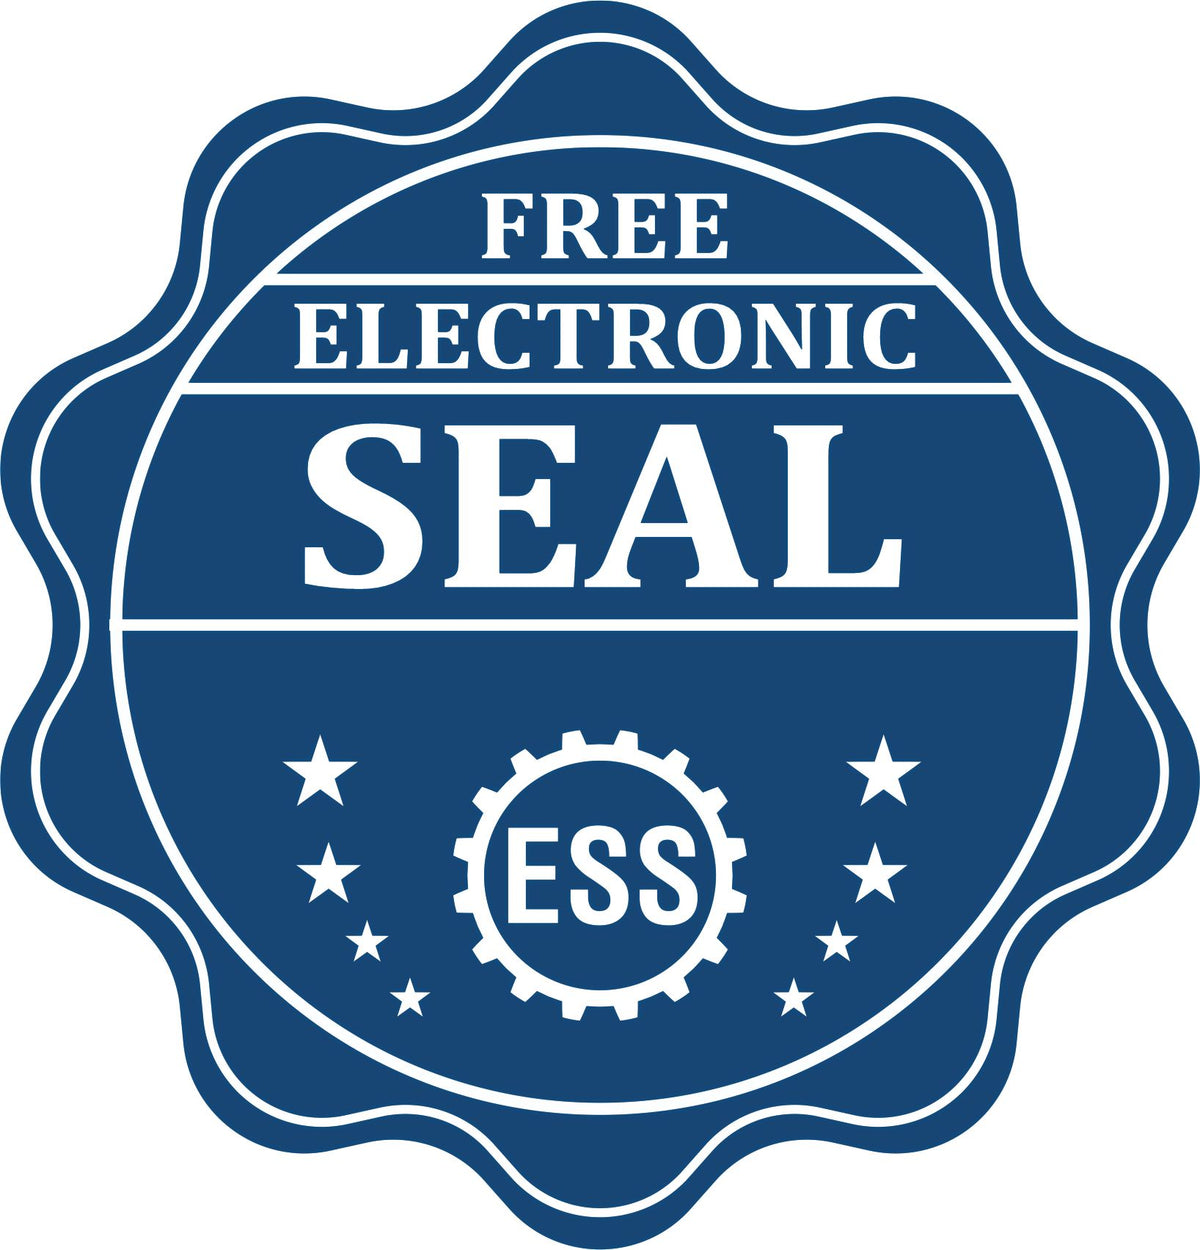 A badge showing a free electronic seal for the Gift Mississippi Landscape Architect Seal with stars and the ESS gear on the emblem.